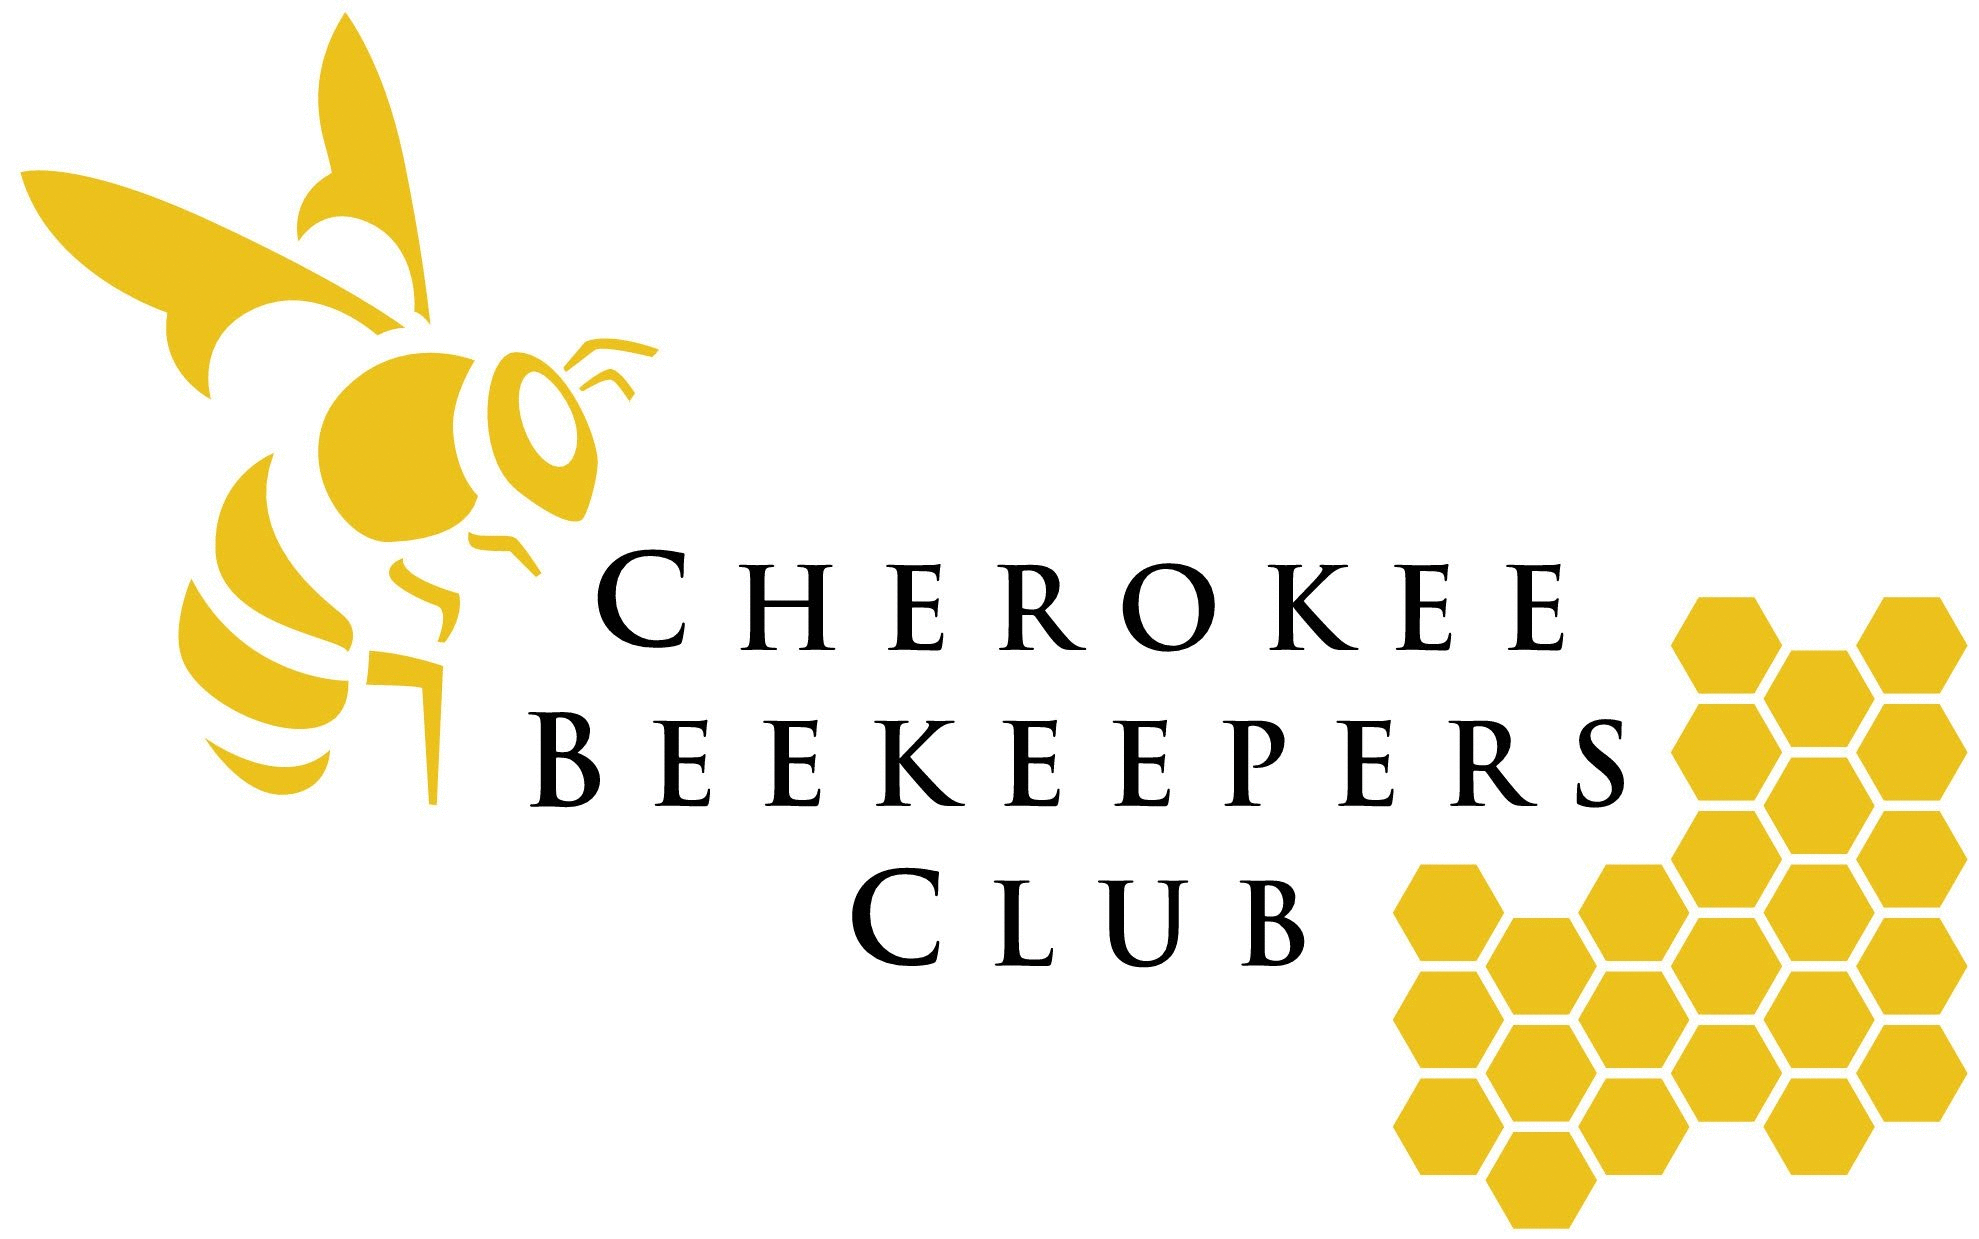 Beekeeping Logo - Bee Products For Sale!